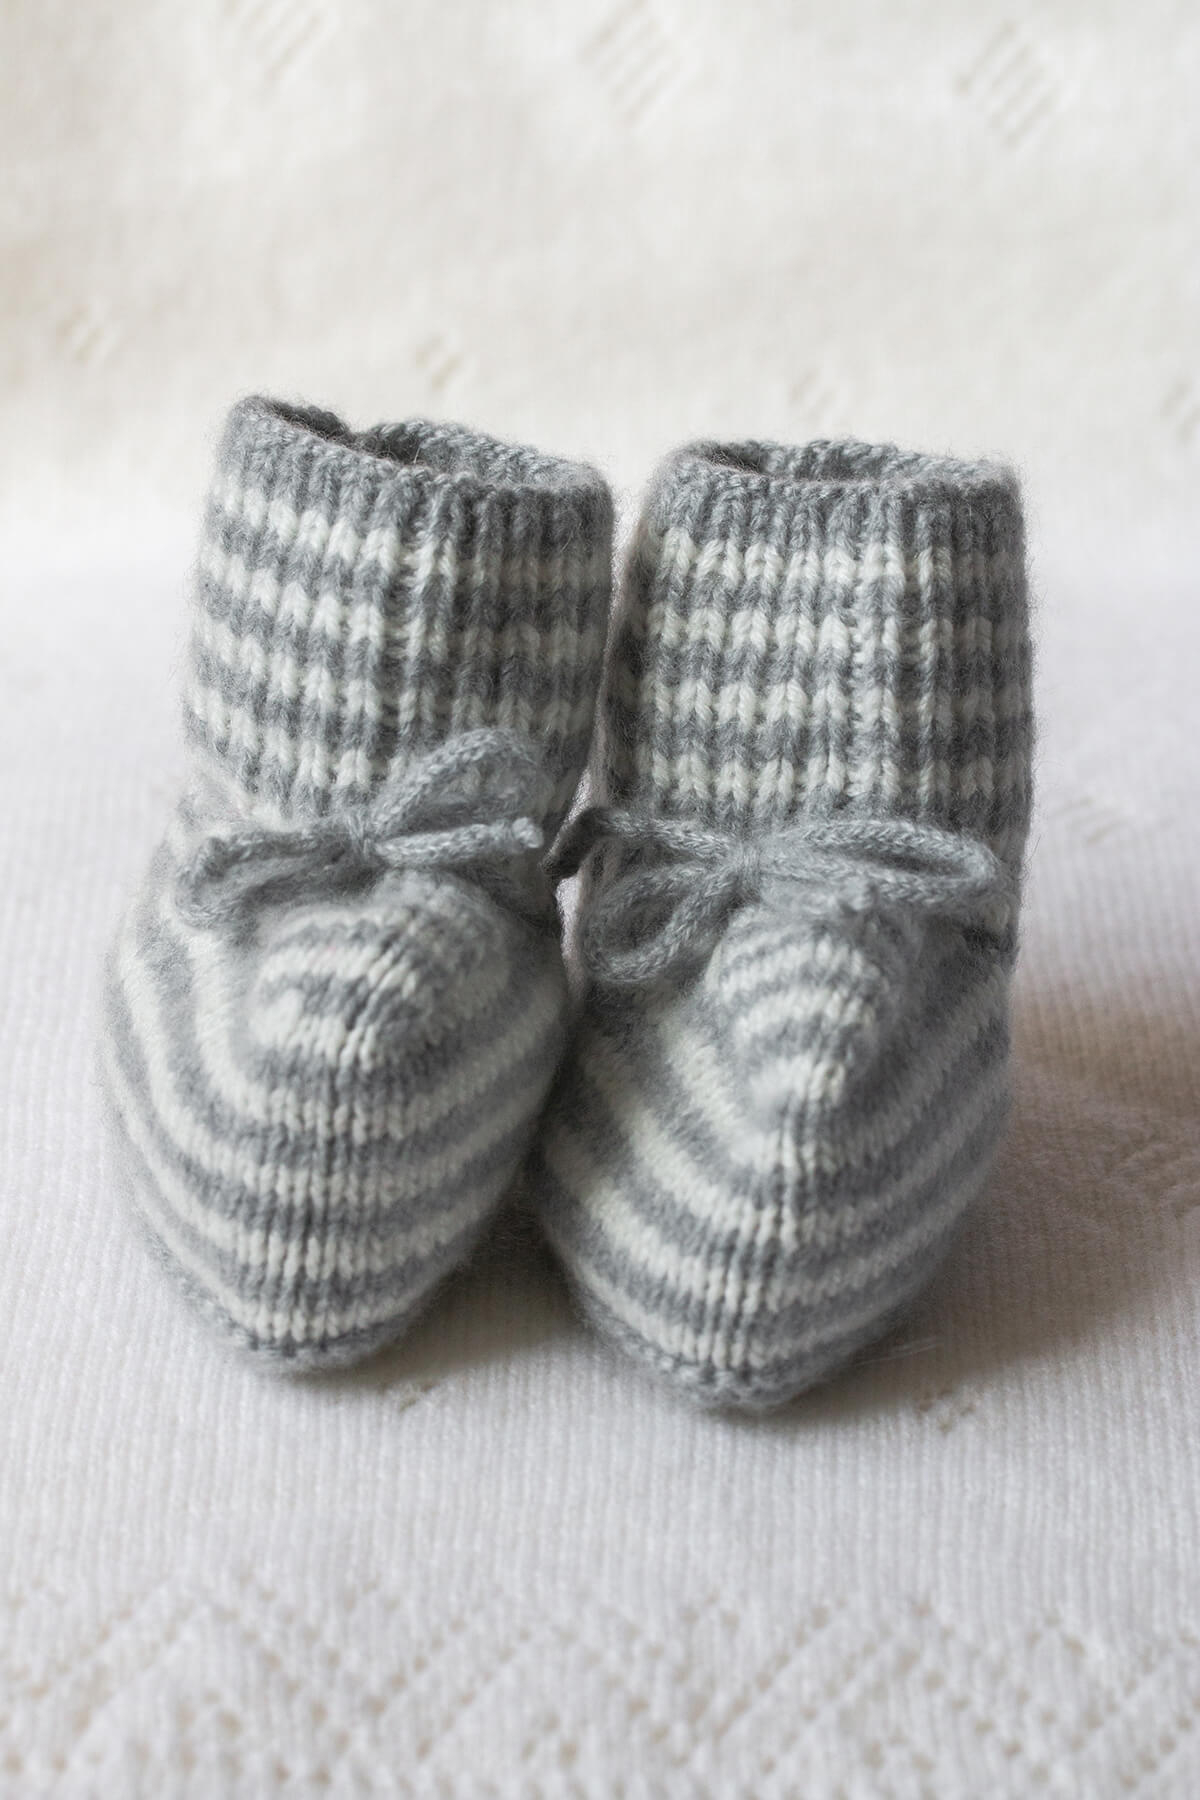 Johnstons of Elgin Hand Knitted Cashmere Baby Booties with crotched trims in Silver & White on a white Cashmere Baby Blanket background 746334243